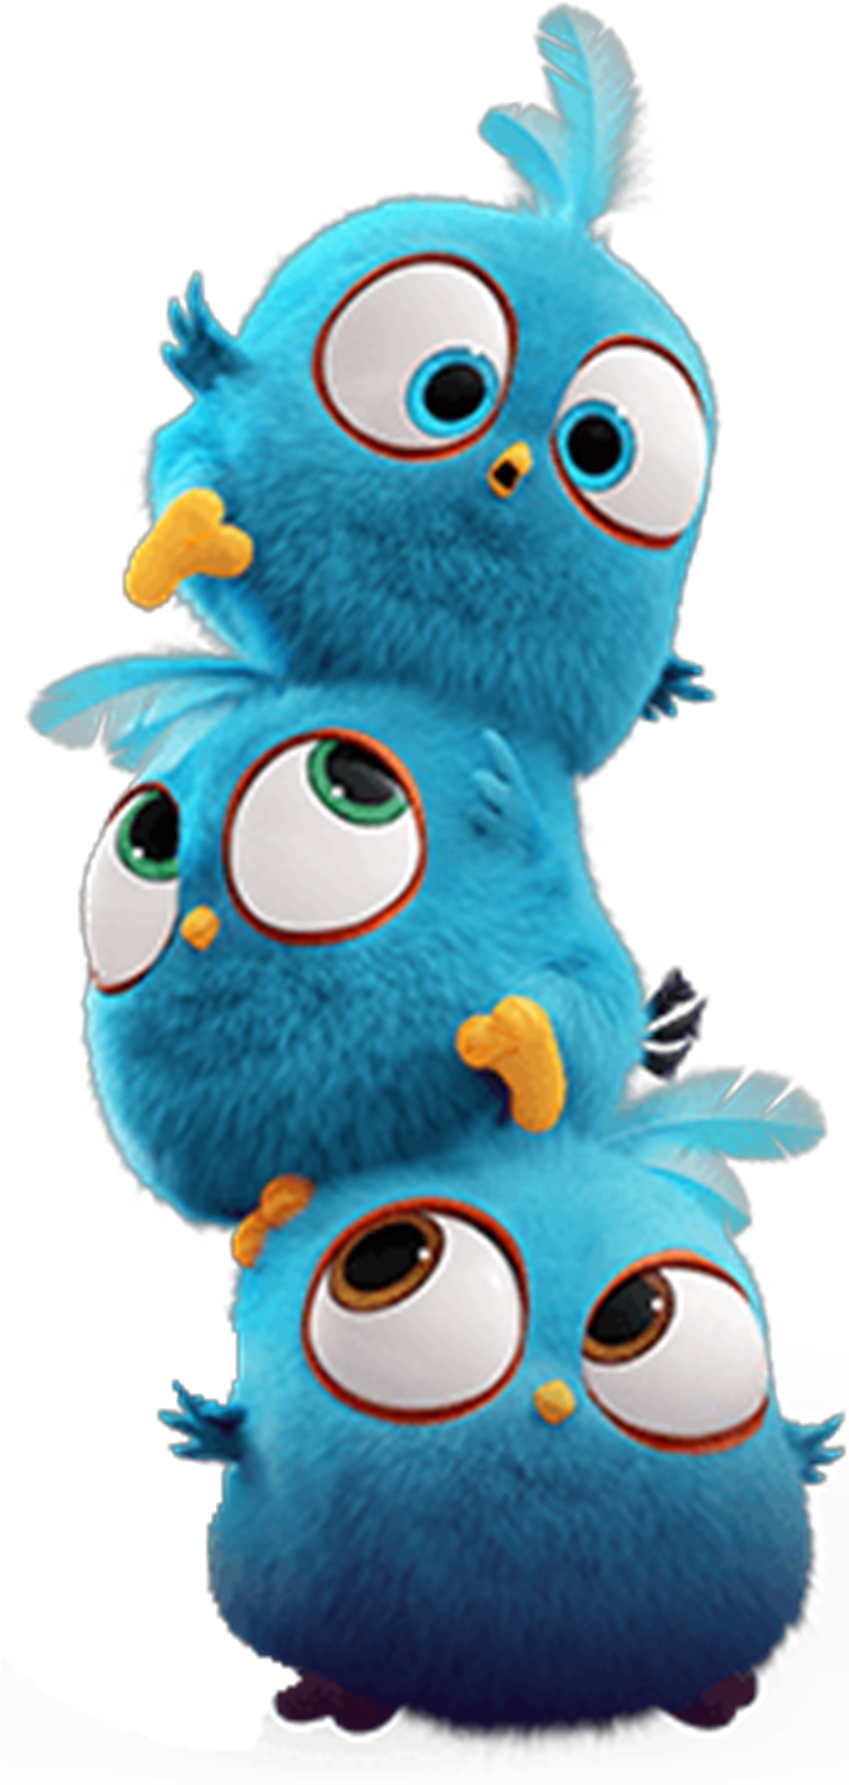 Cute Bird Cartoon Delivering Letter Ilration 33992741 - Angry Birds Movie The Blues (848x1814)